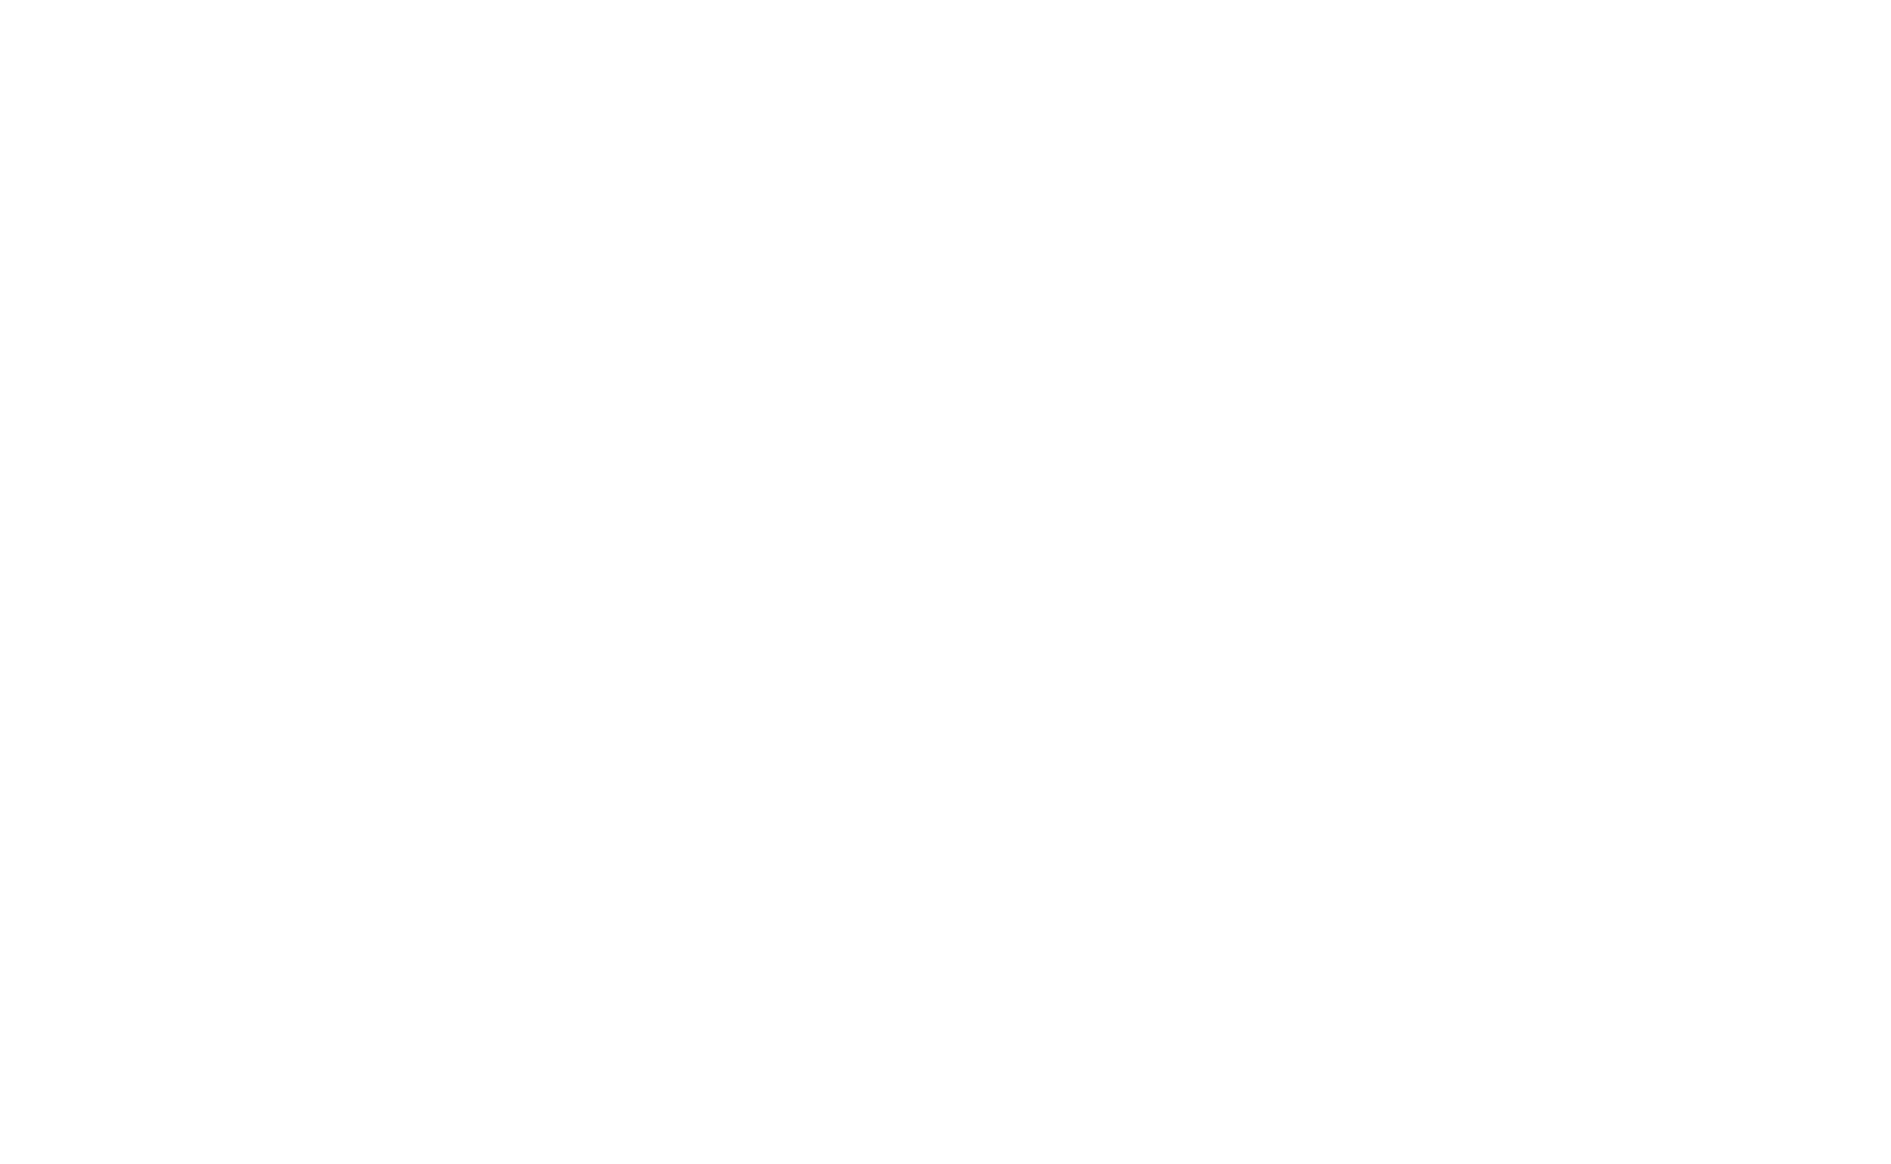 Device Store